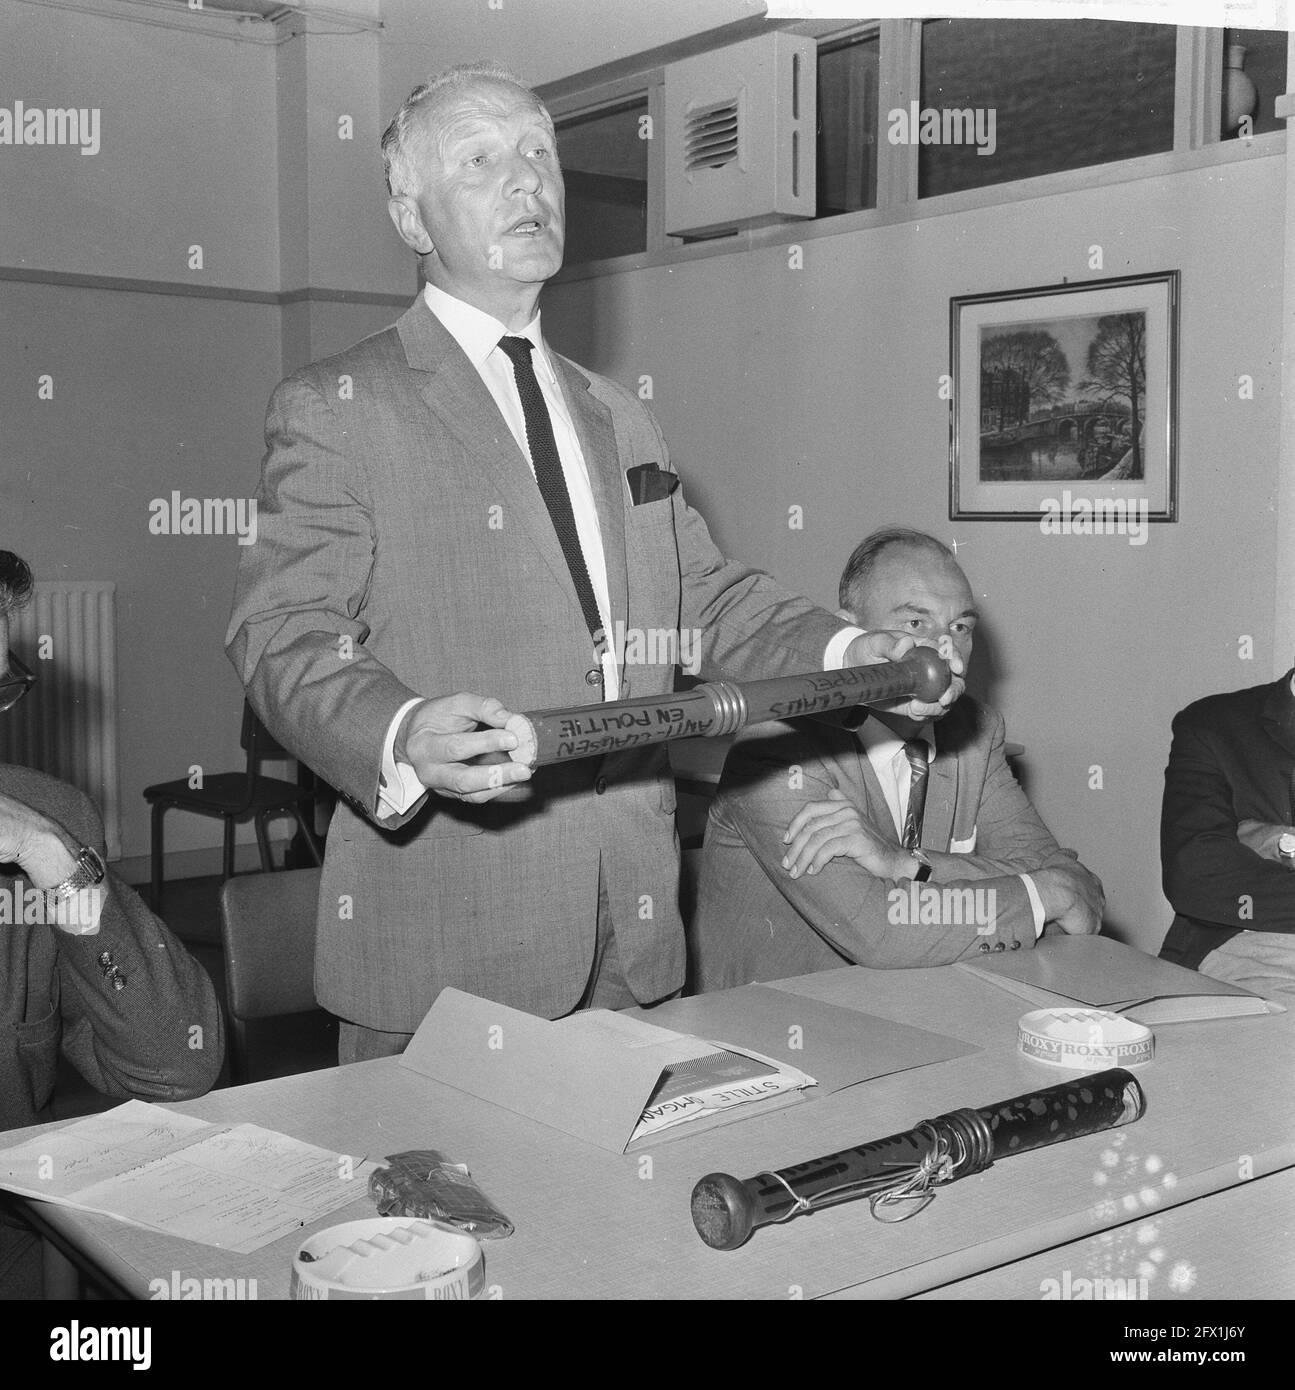 Commissioner Molenkamp gives press conference, August 14, 1965, chief of police, press conferences, police, The Netherlands, 20th century press agency photo, news to remember, documentary, historic photography 1945-1990, visual stories, human history of the Twentieth Century, capturing moments in time Stock Photo